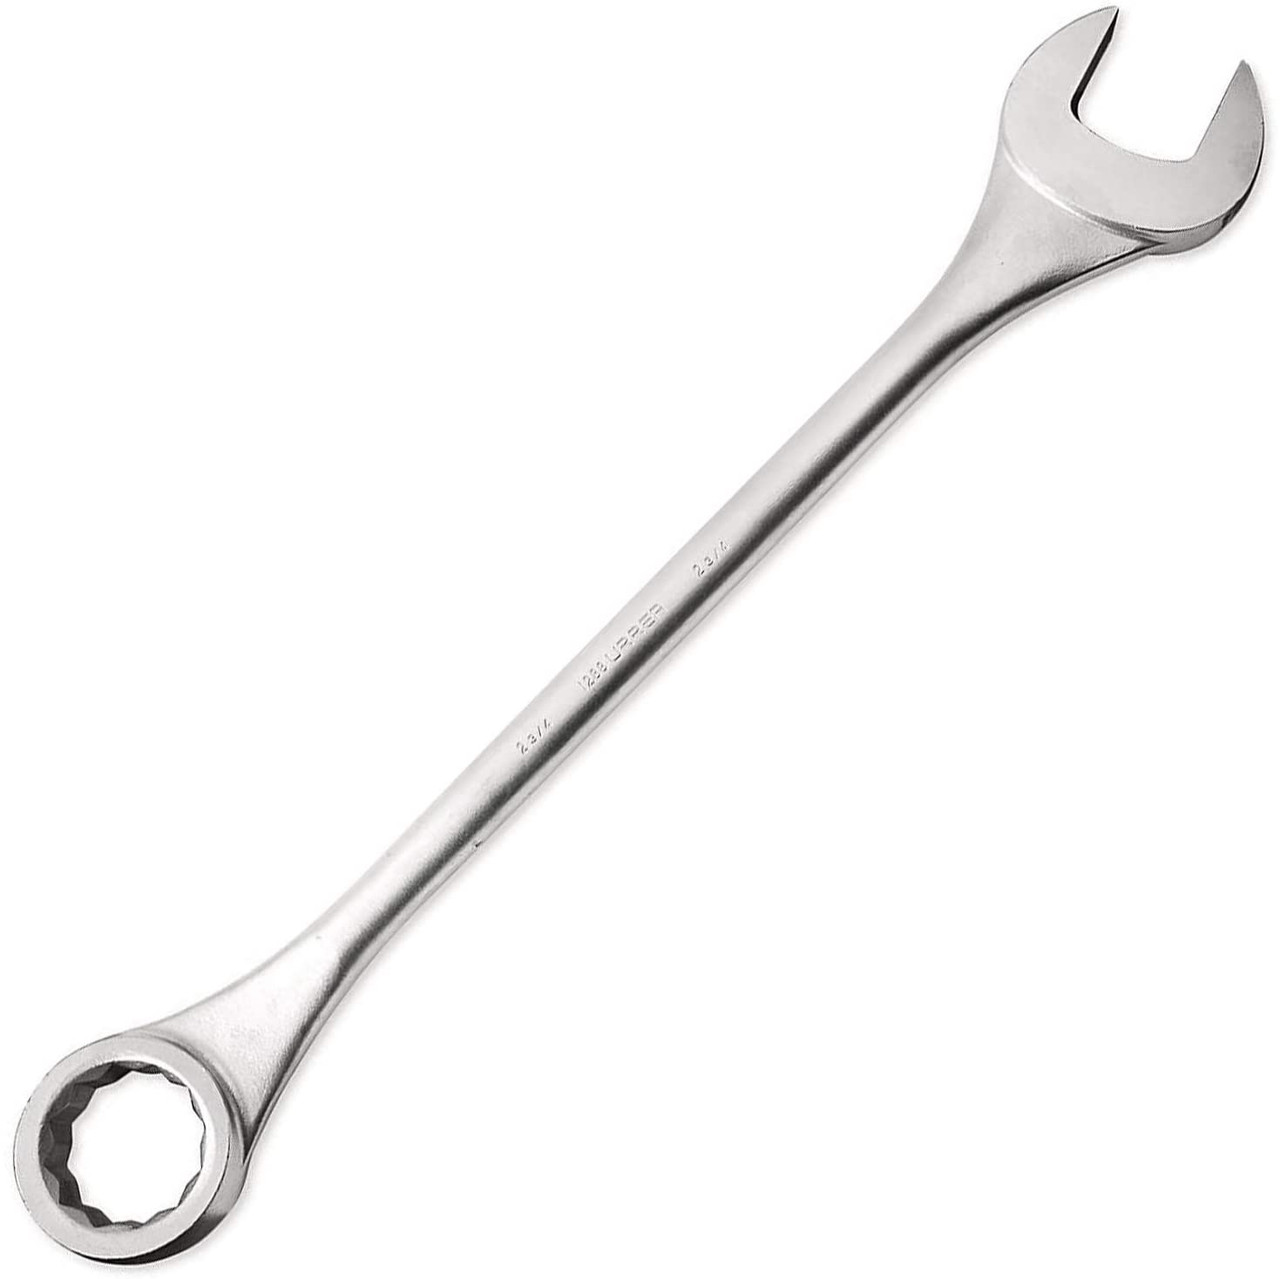 Satin finish combination wrench, Size: 2-1/4, 12 point, Tool Length: 30"